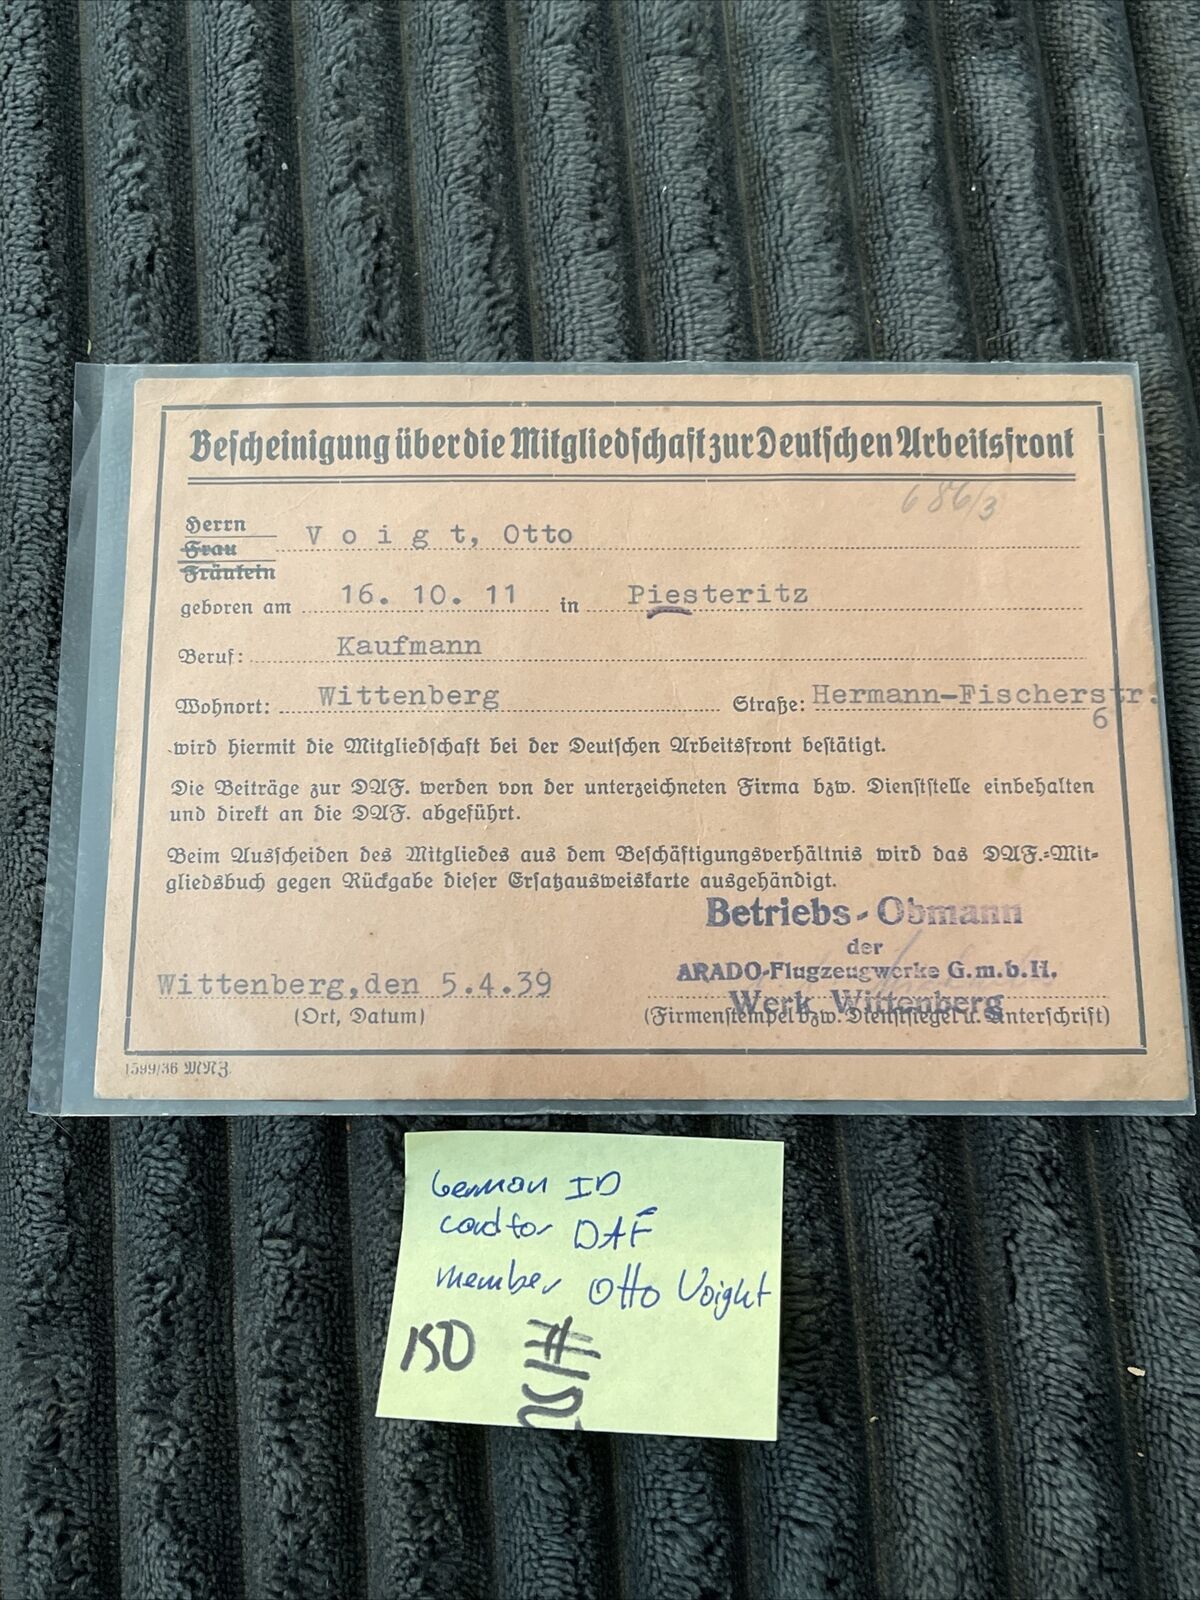 WWII 1939 German ID Identification card For DAF Member Otto Voigt